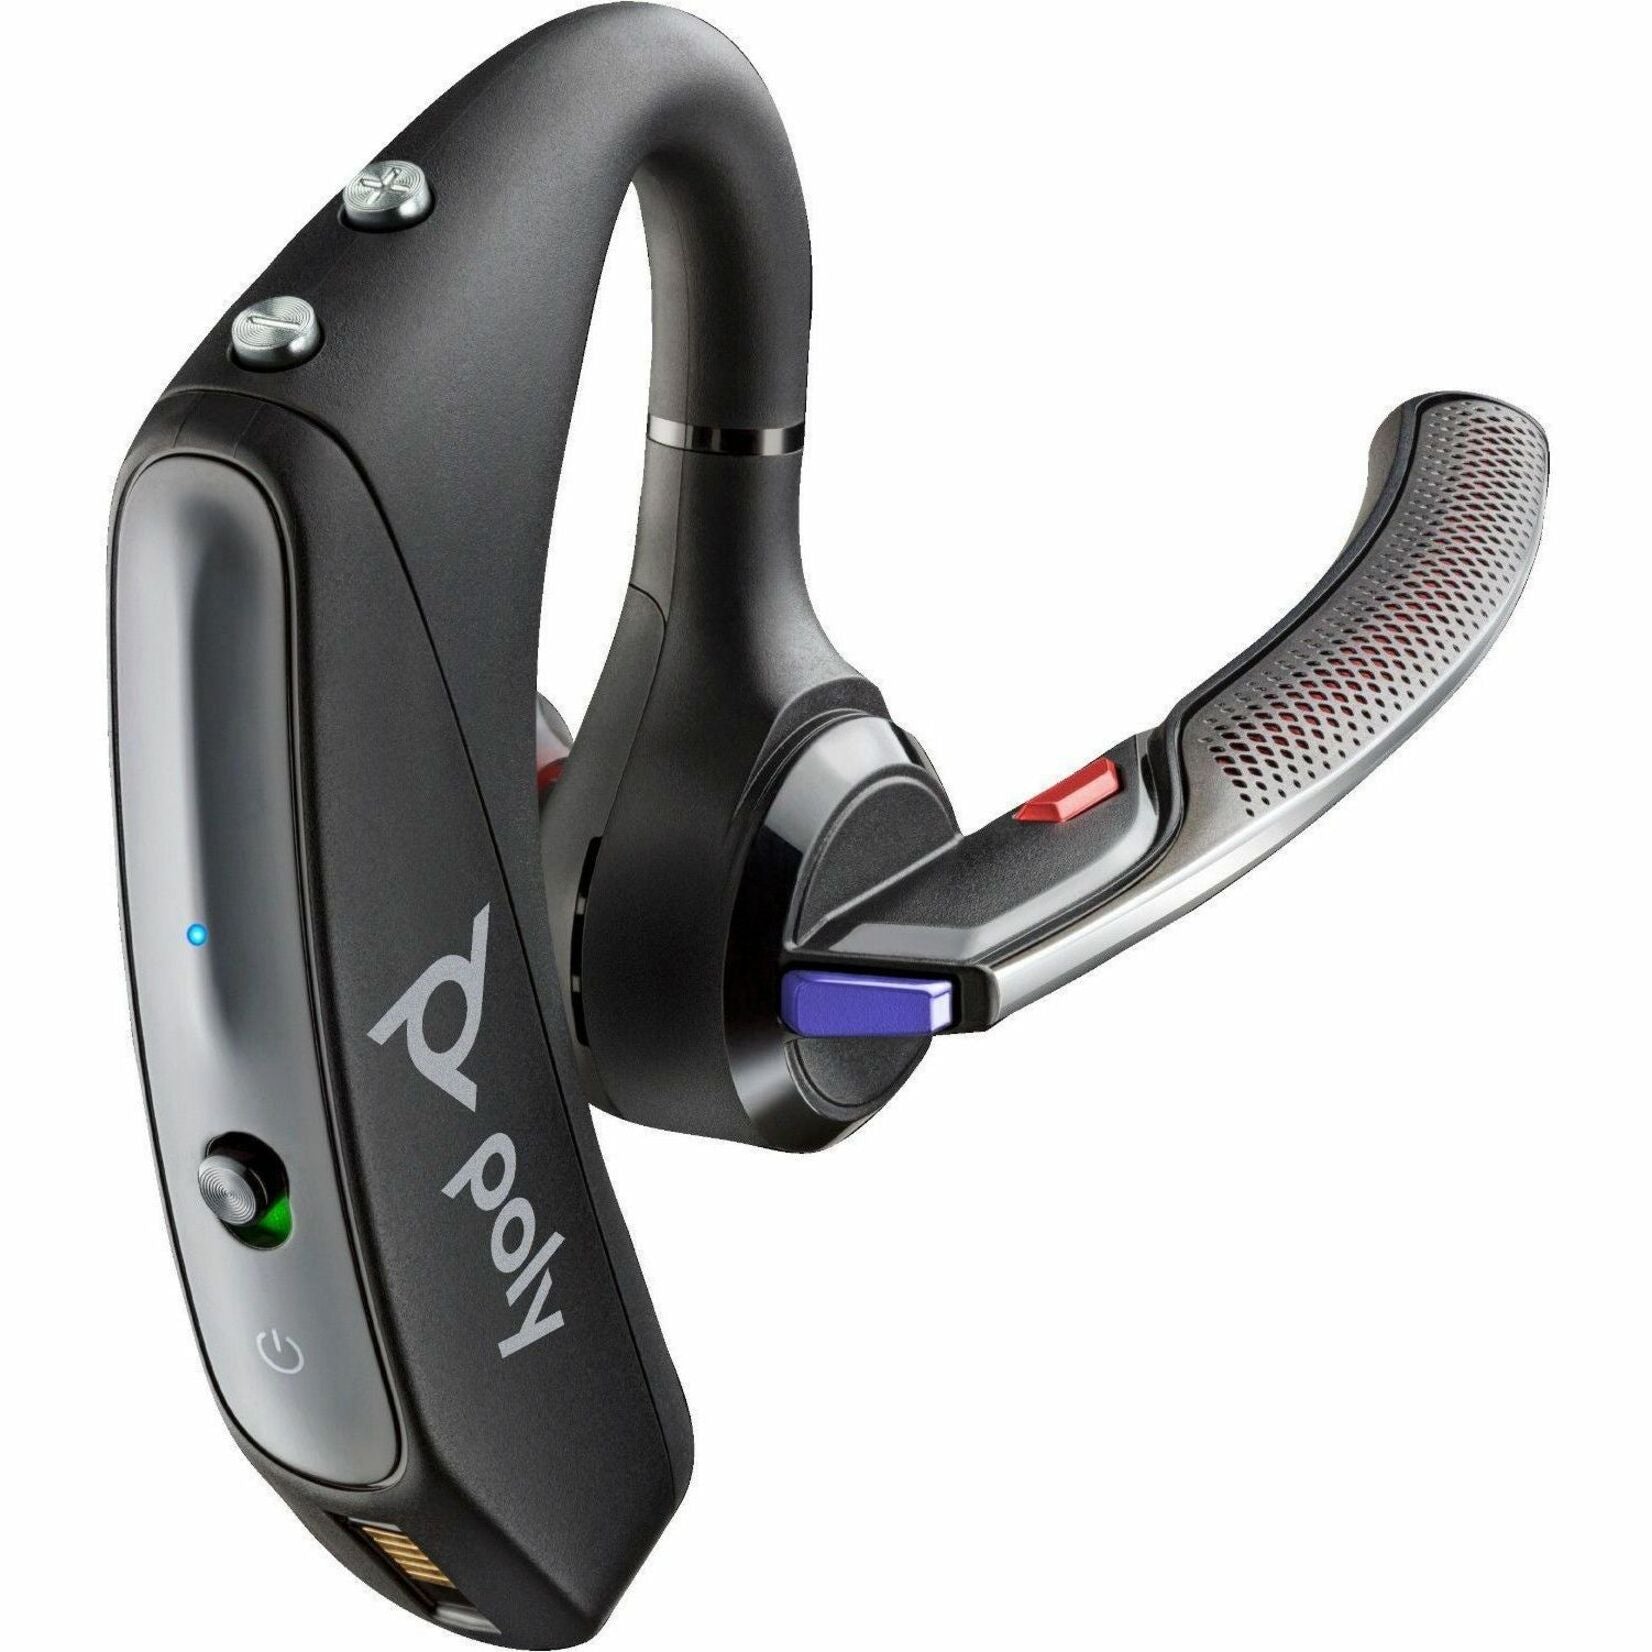 Poly Voyager 5200 USB-A Office Headset TAA, Mono Earset, Wireless Bluetooth 5.0, 7 Hour Battery Talk Time, Black